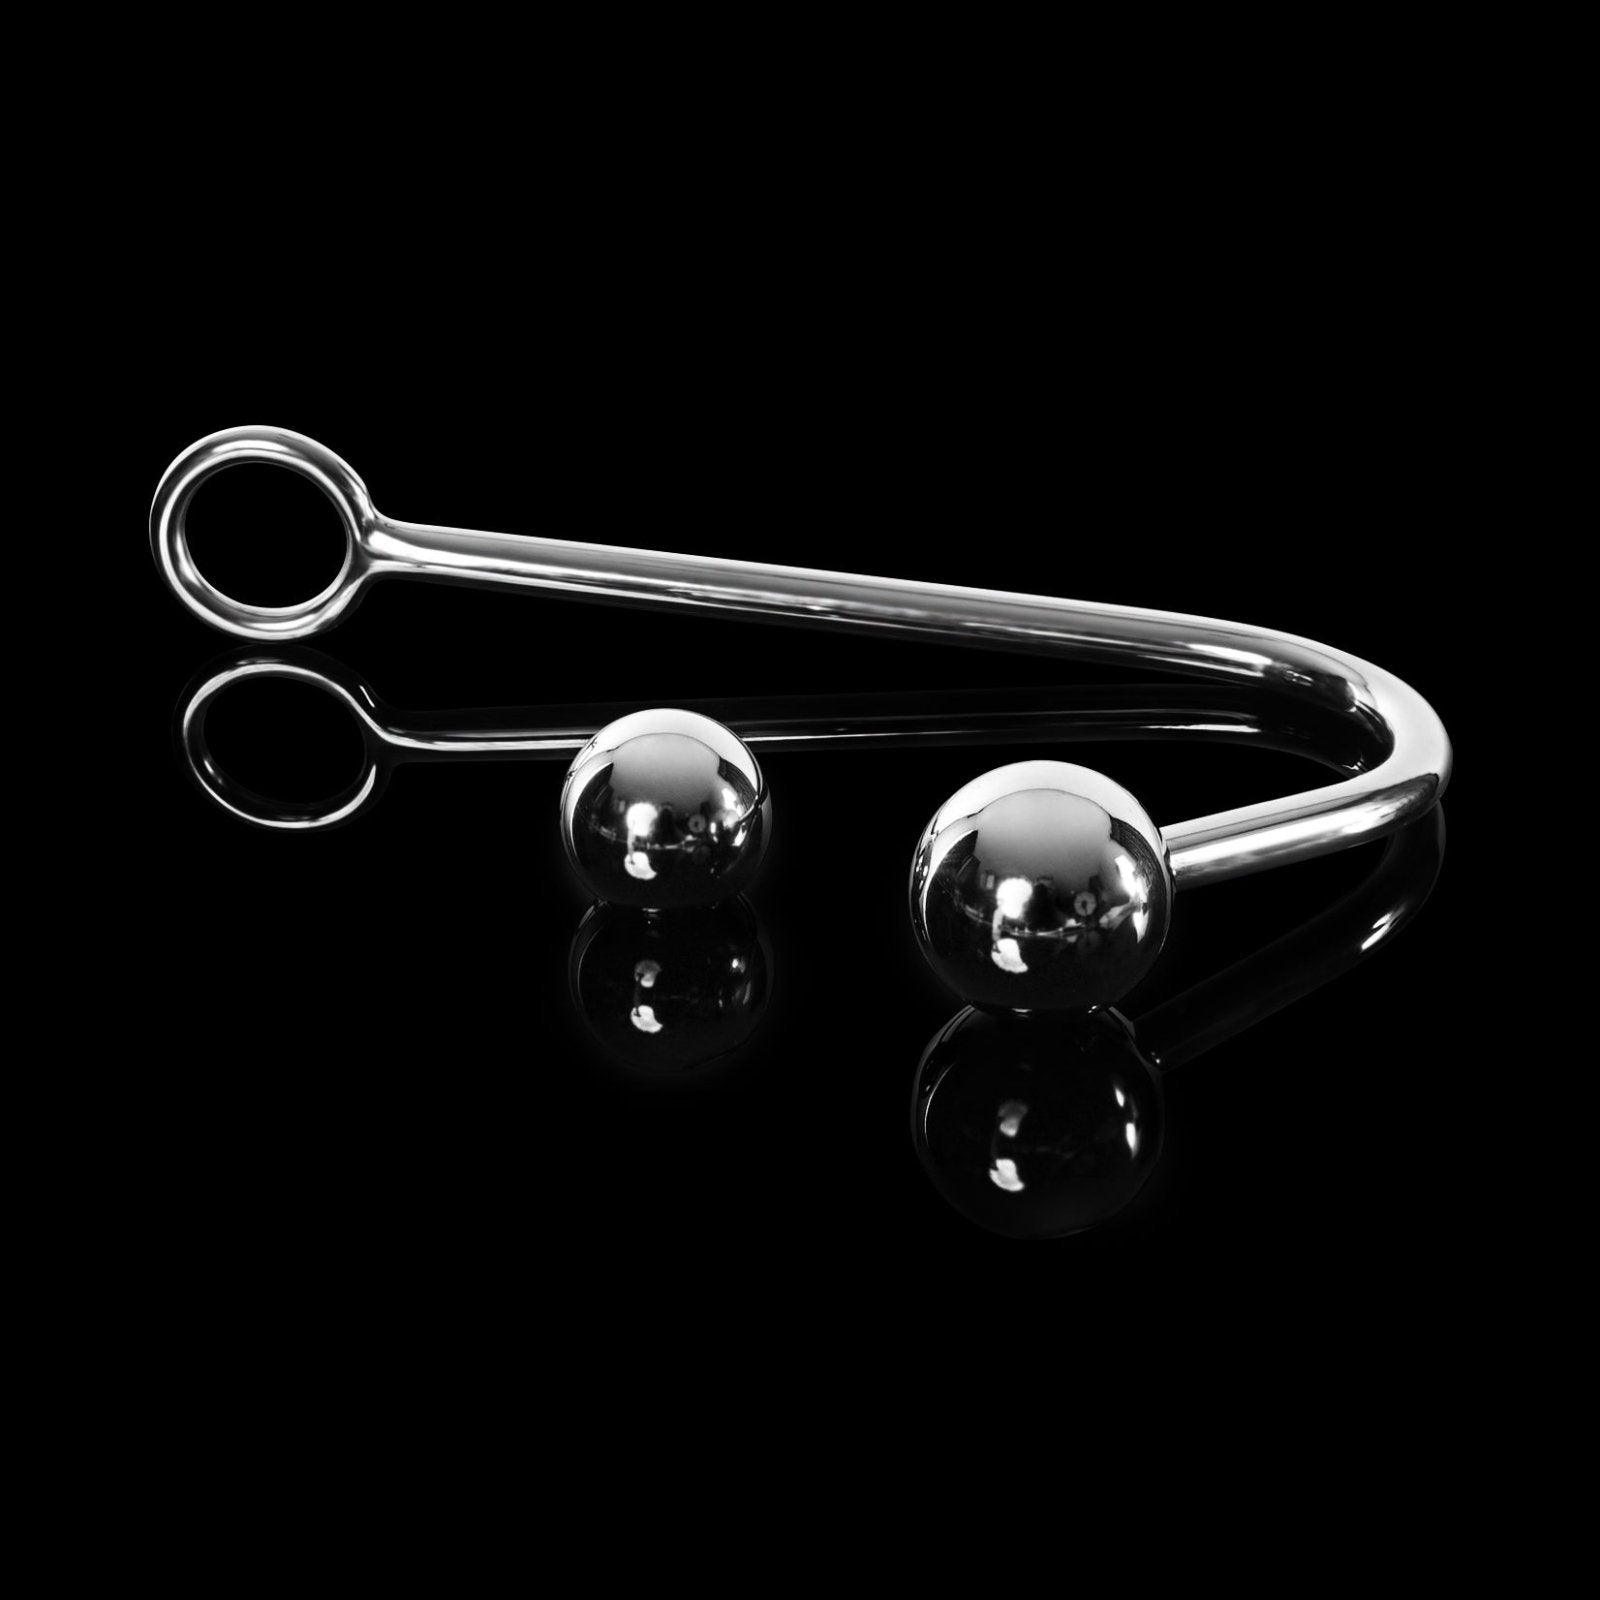 Base By Kink Small Metal Anal Hook with 2 Balls - Kink Store